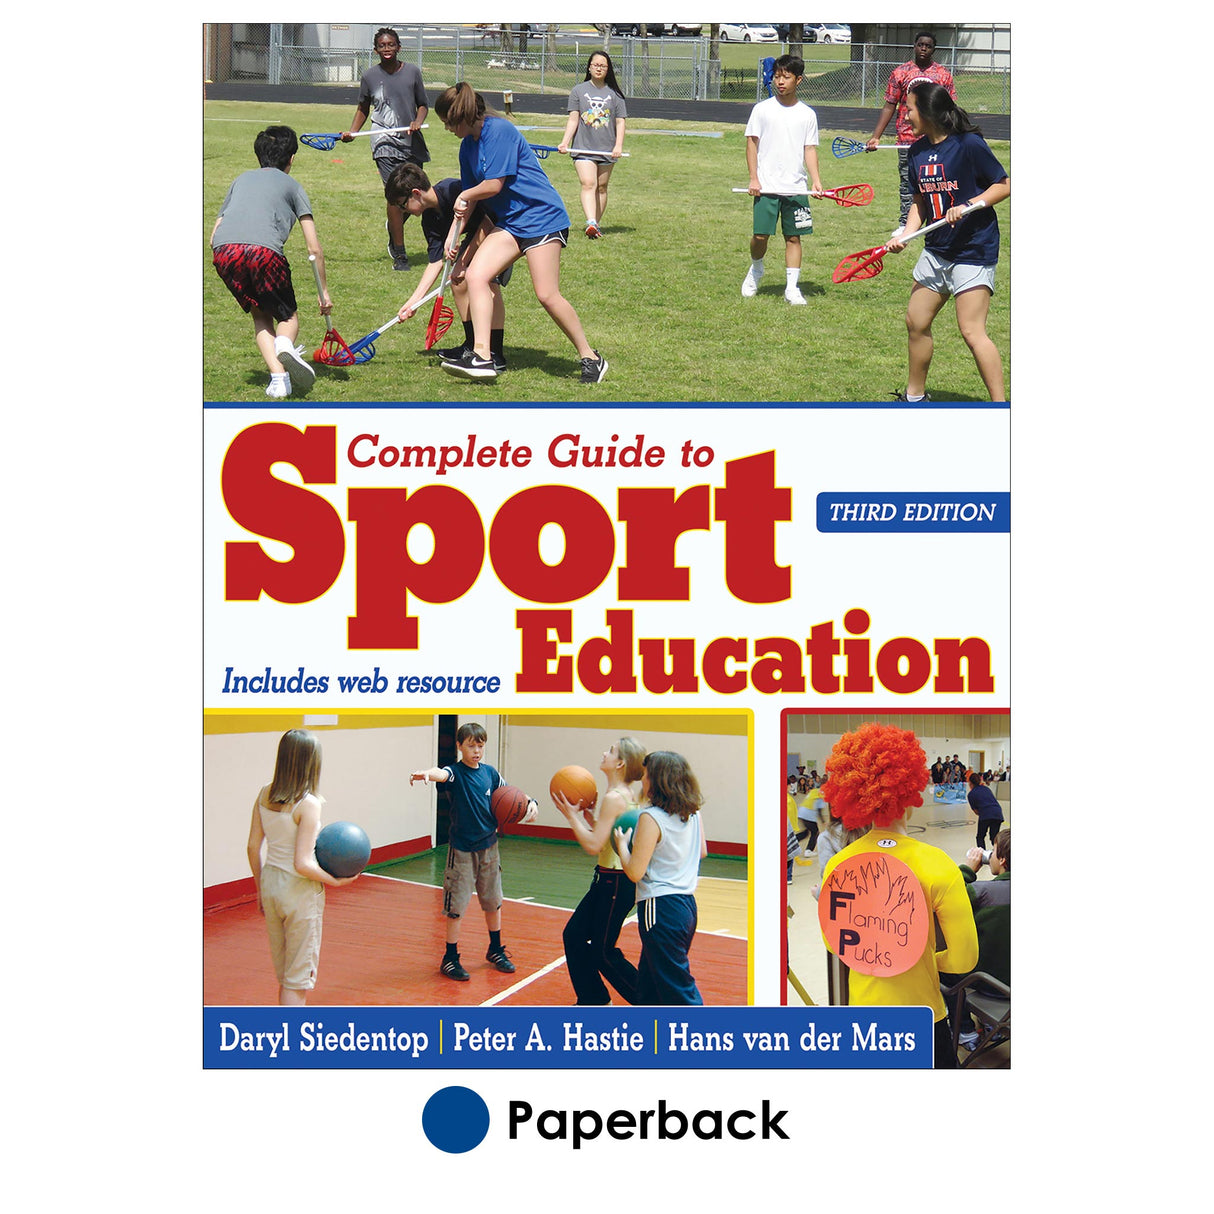 Complete Guide to Sport Education 3rd Edition With Web Resource